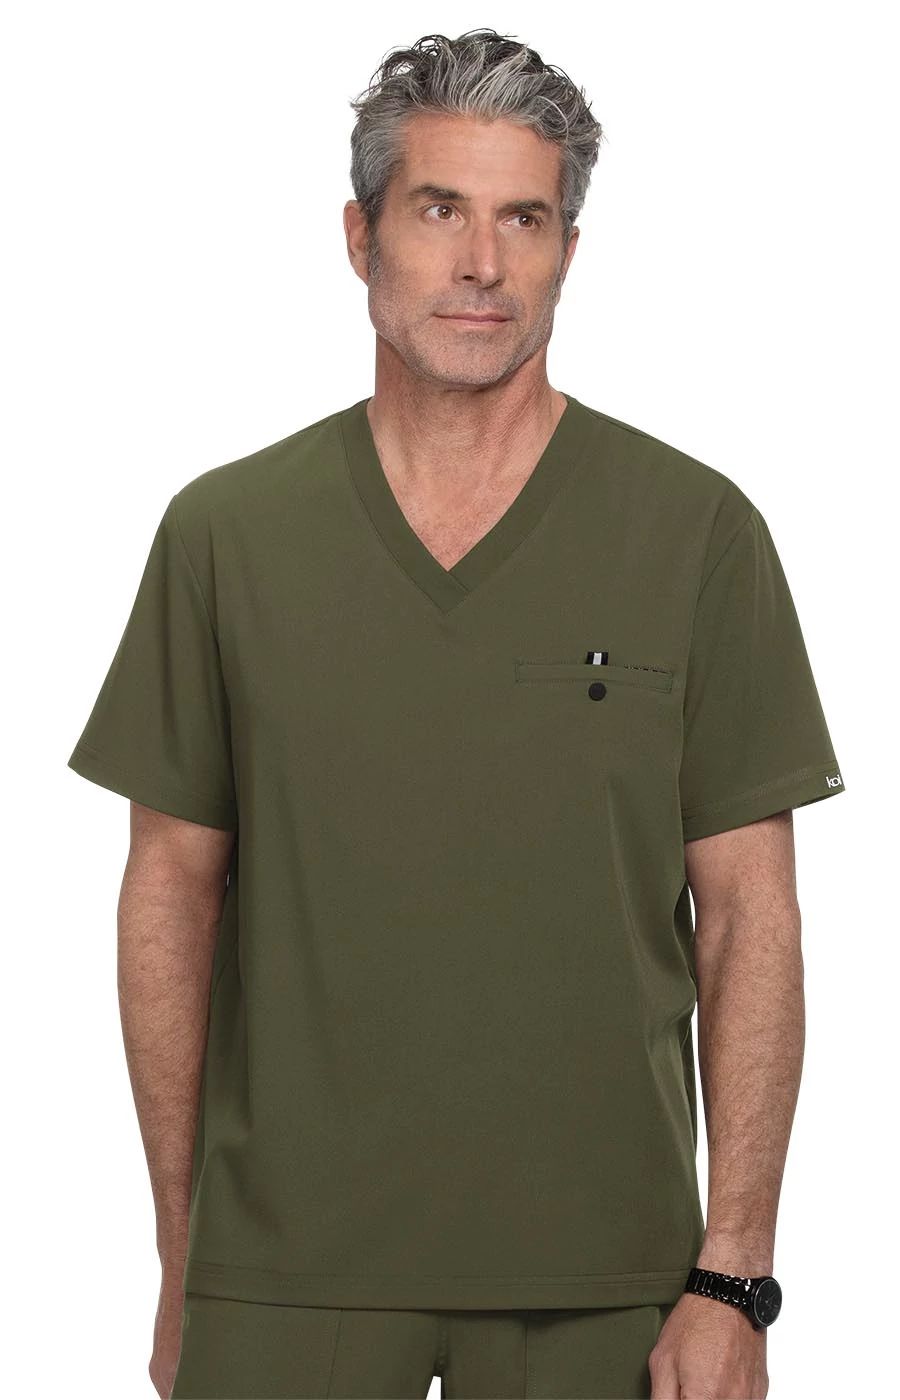 on-call-top-olive-green